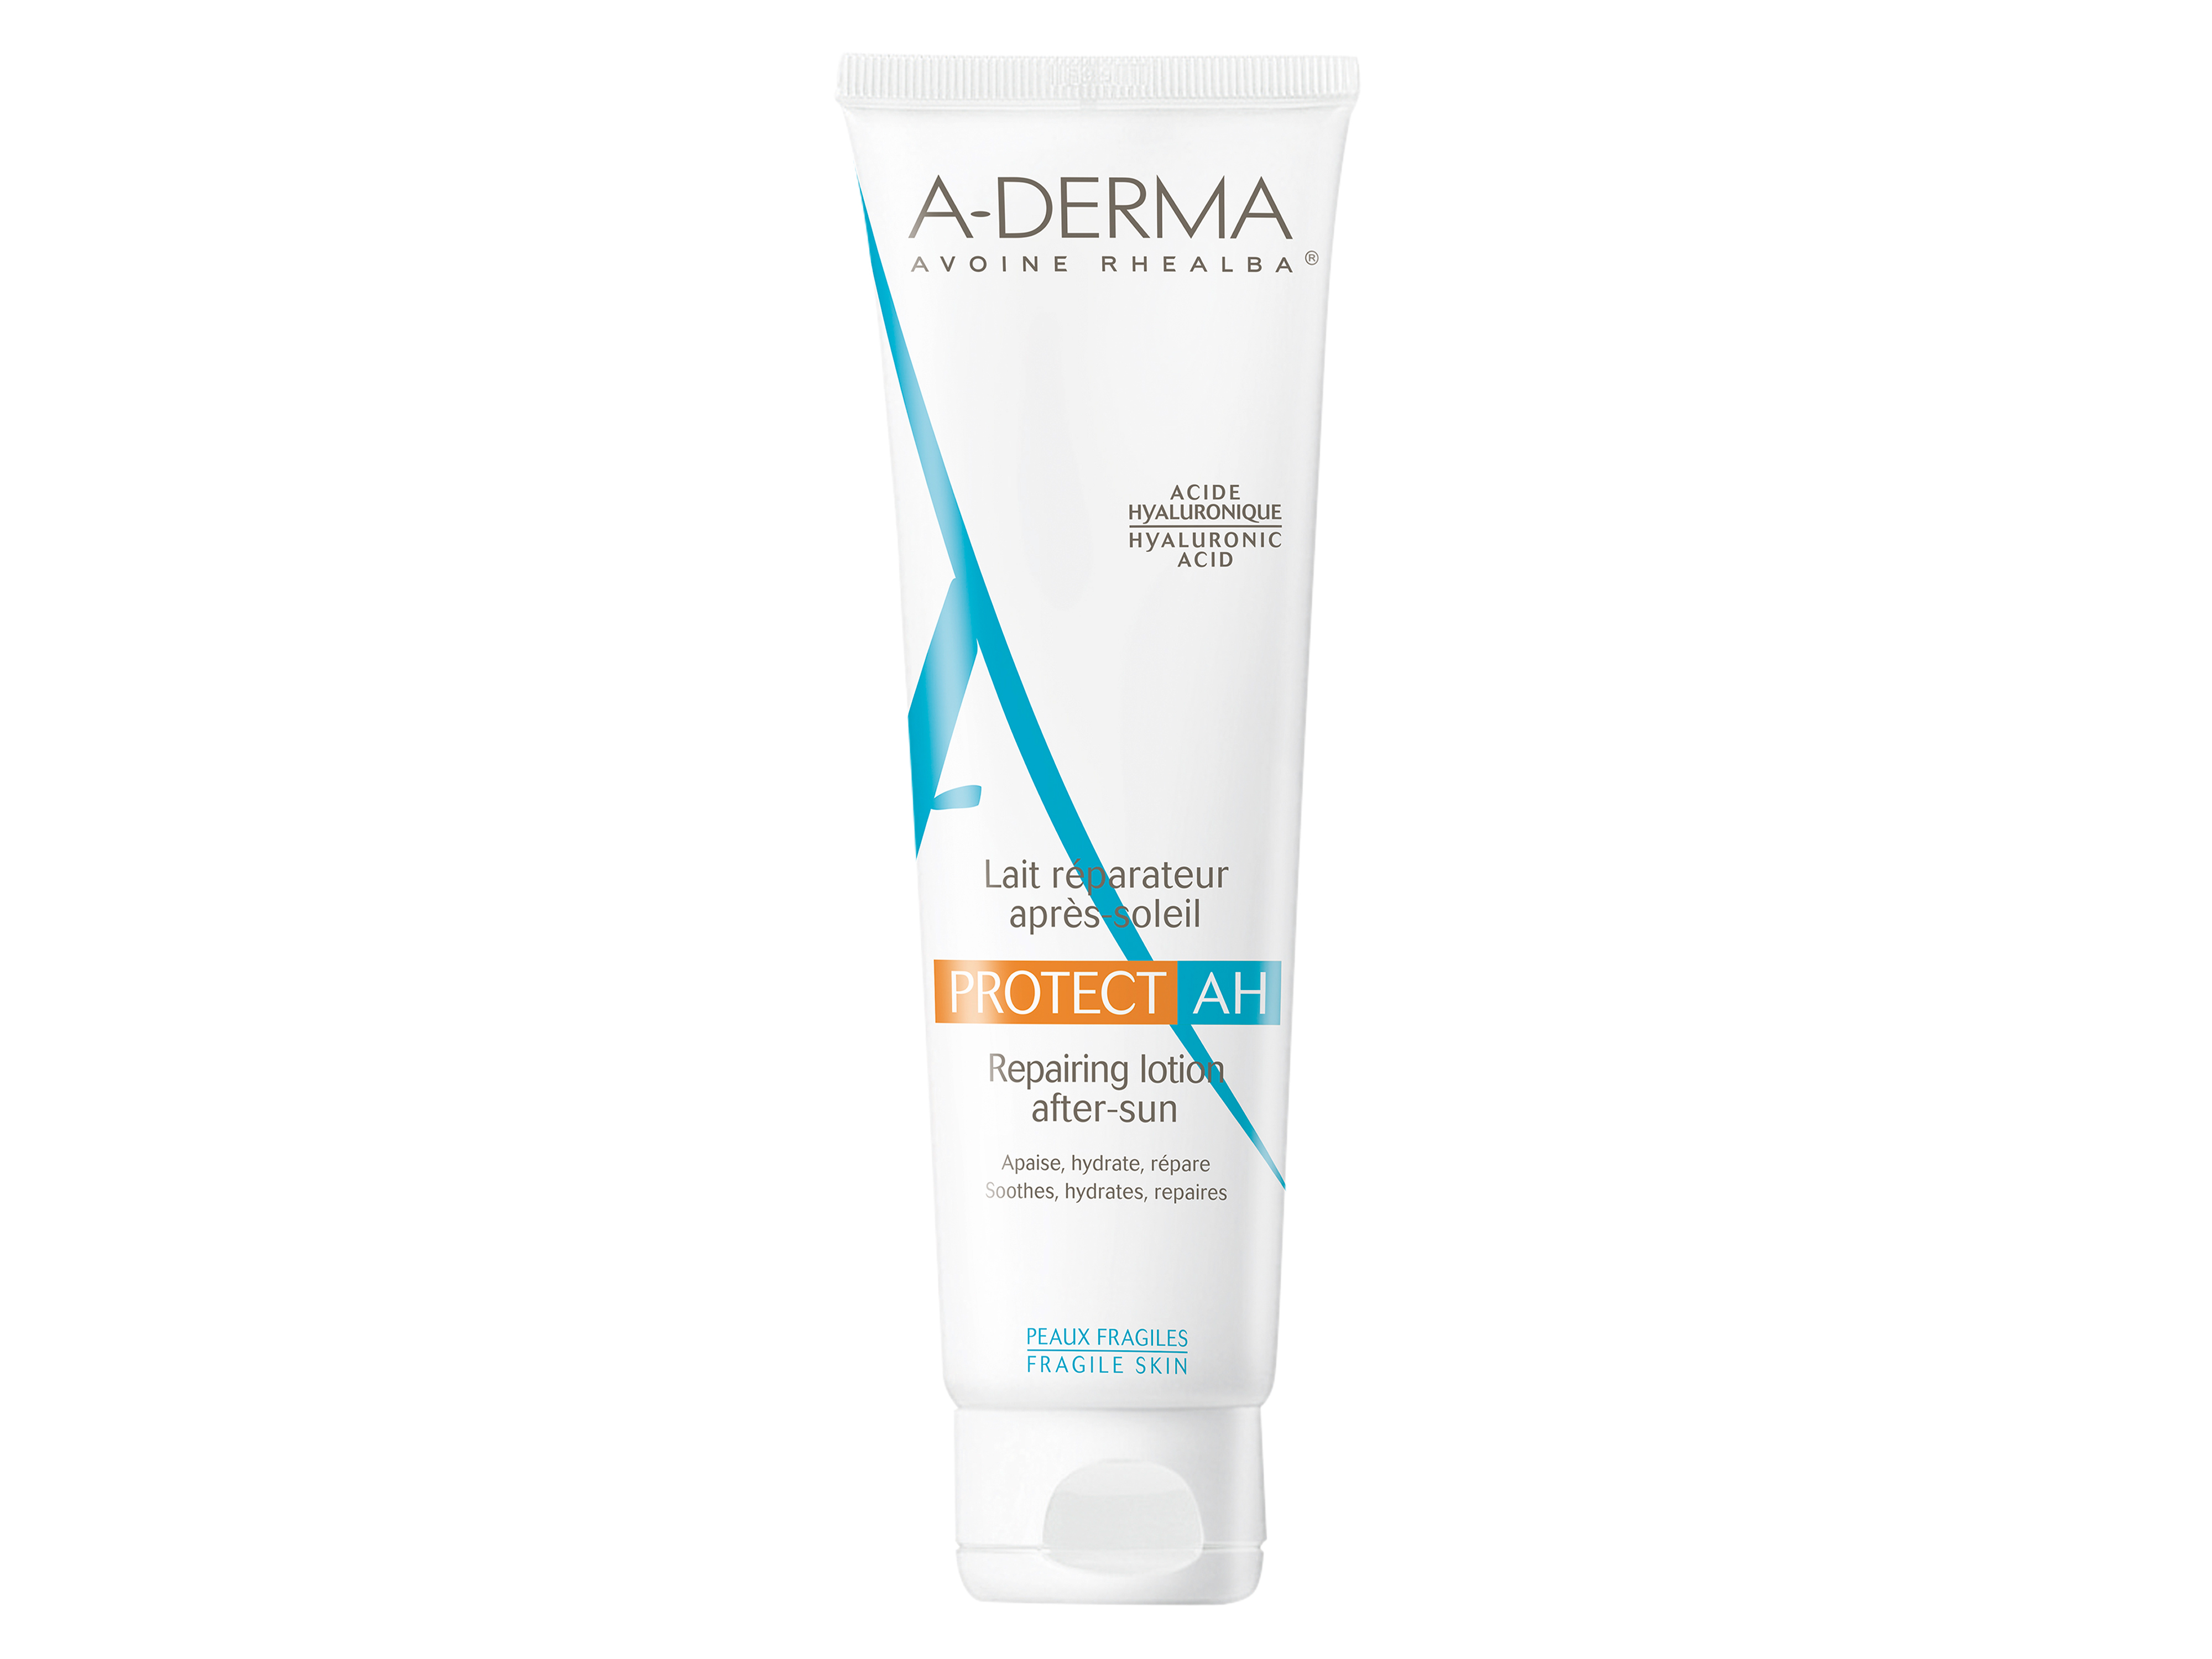 A-Derma Protect AH After Sun Lotion, 250 ml